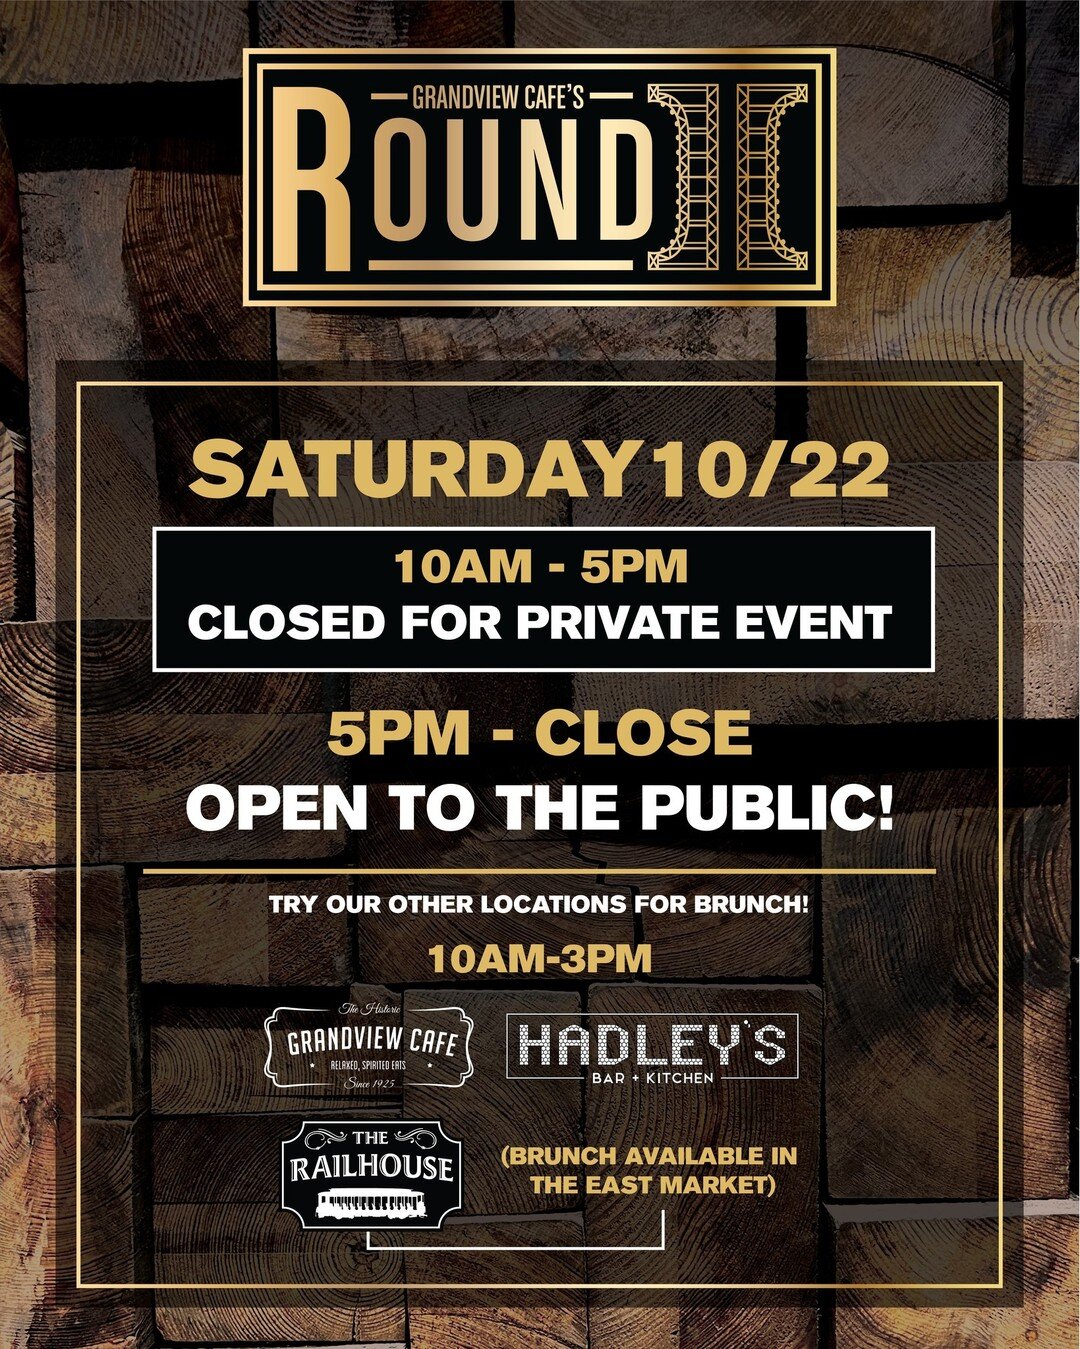 SATURDAY 10/22 | This Saturday Round II will be closed for a private event from 10AM-5PM - But not to worry! We still have plenty of options to get your brunch on!��Try one of our other amazing locations from 10AM-3PM each offering $4 mimosa glasses 